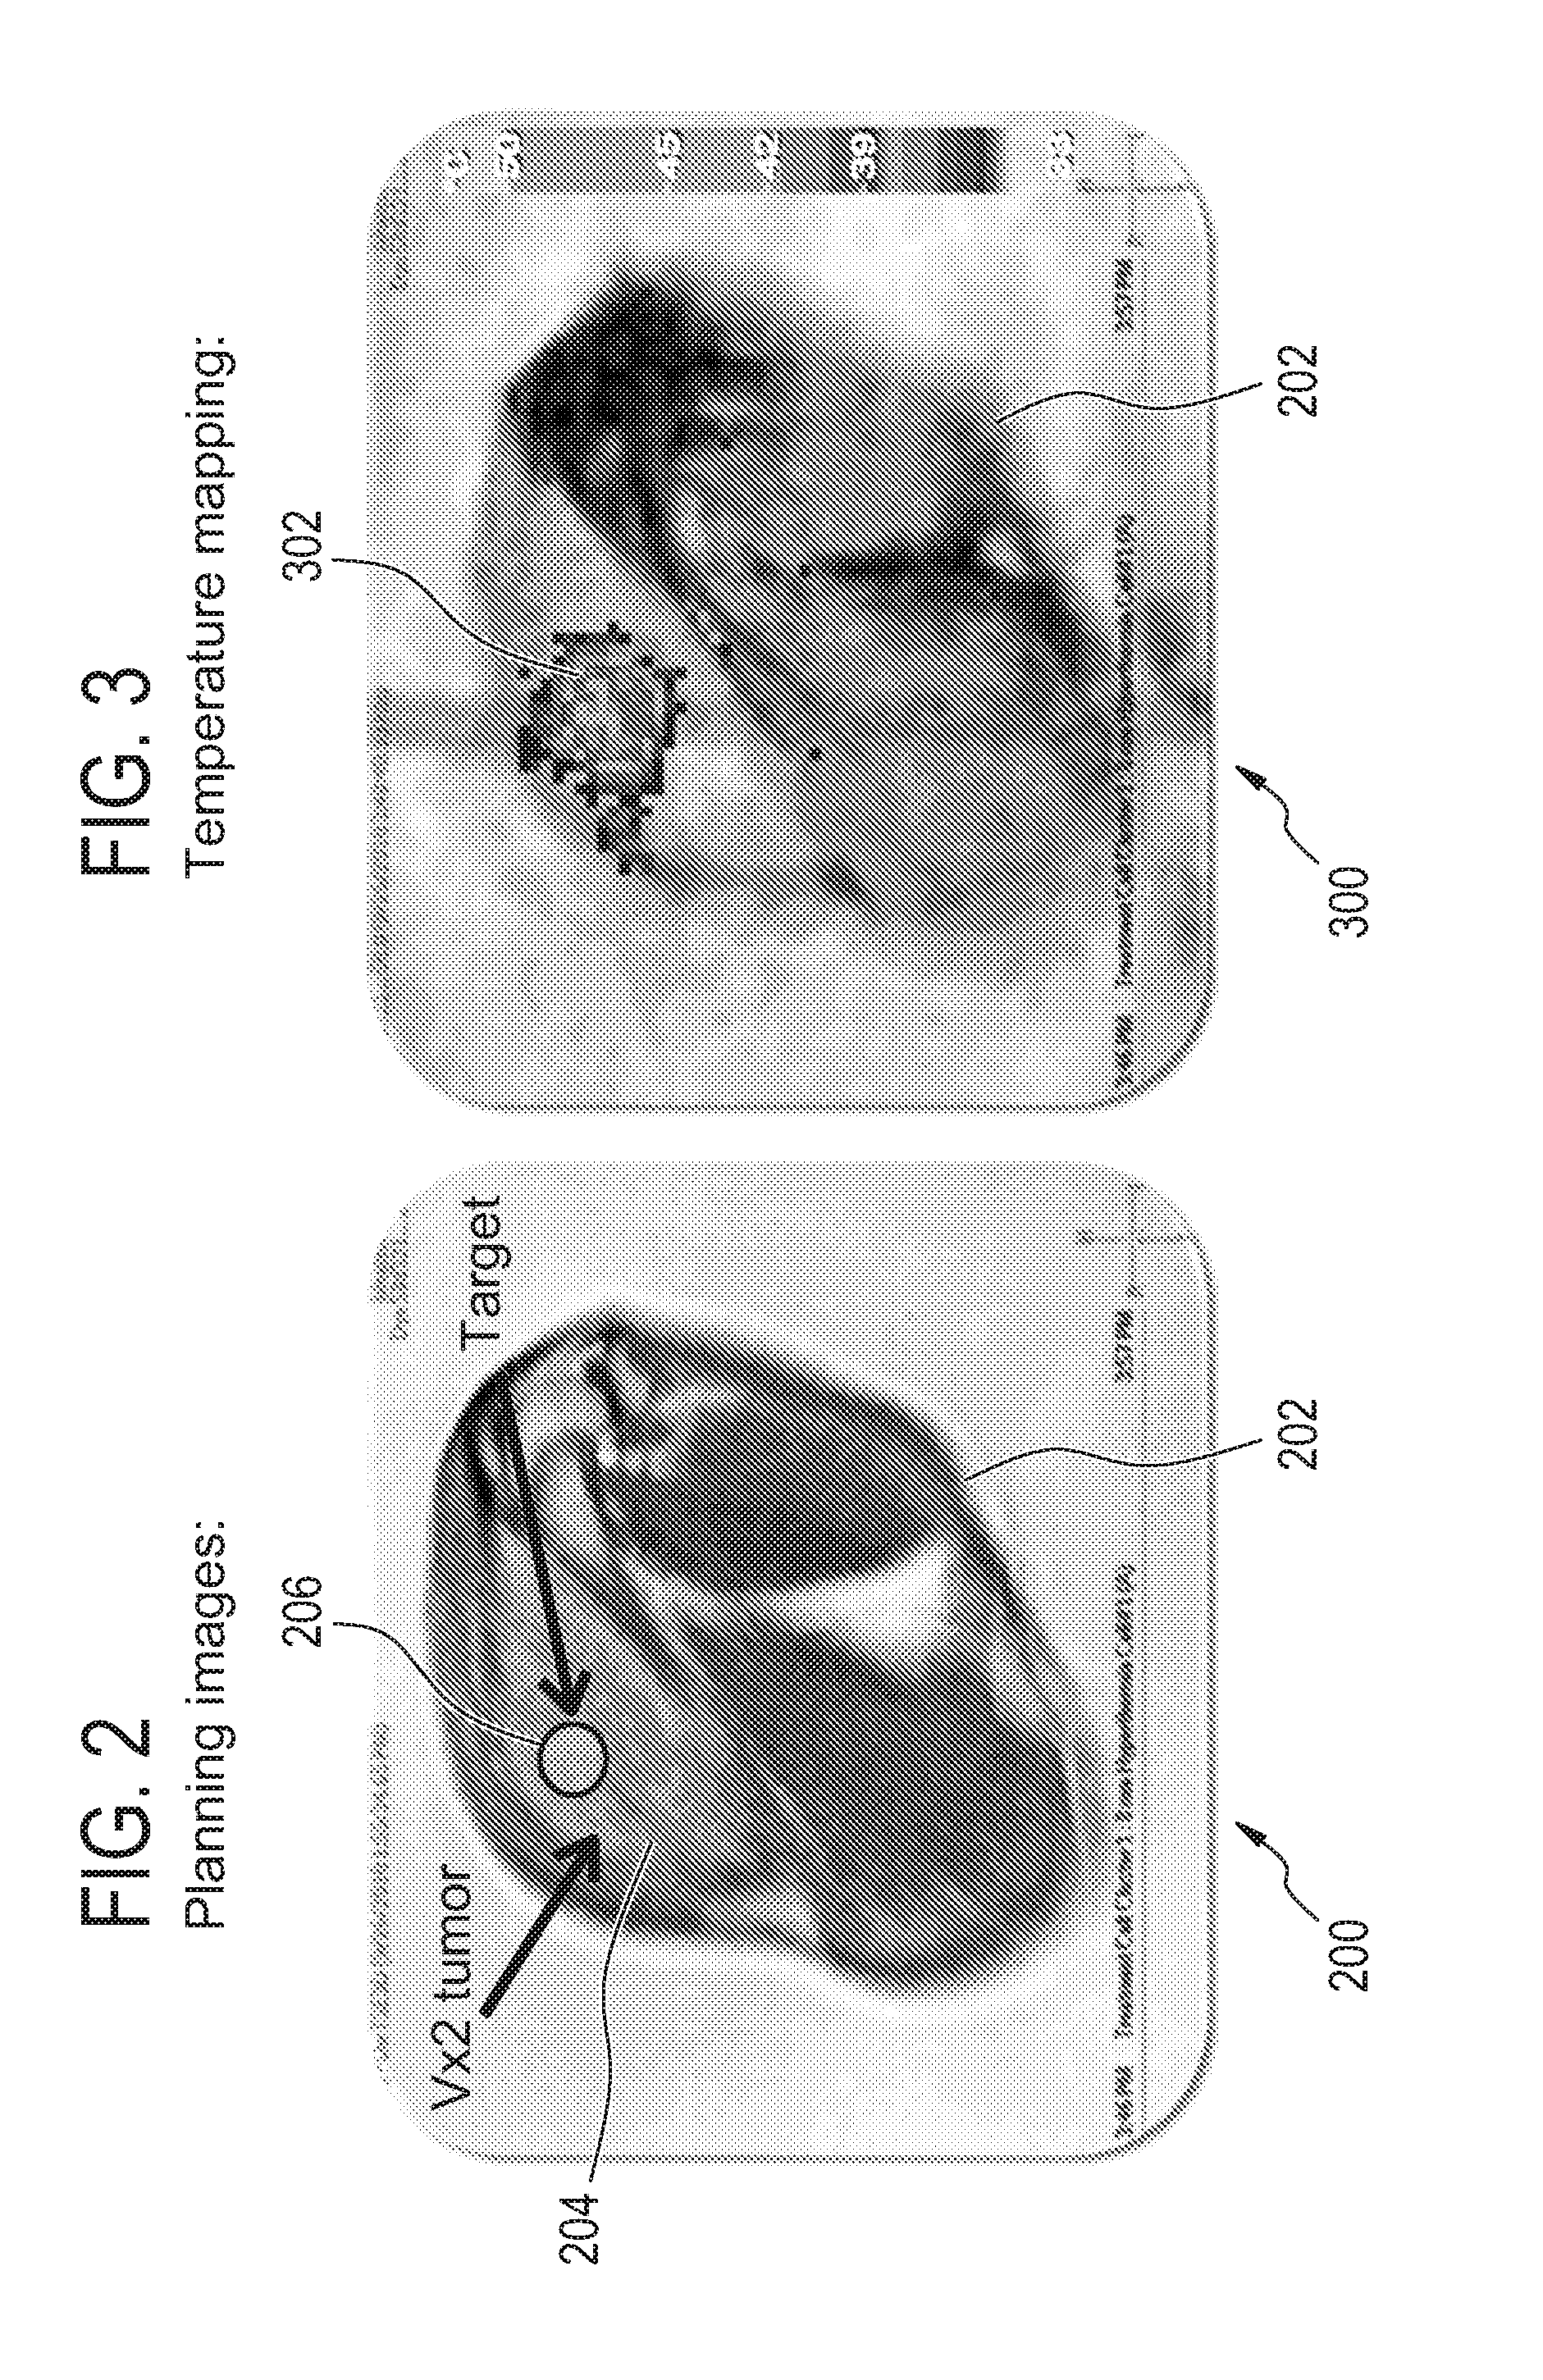 Therapeutic apparatus for heating a subject